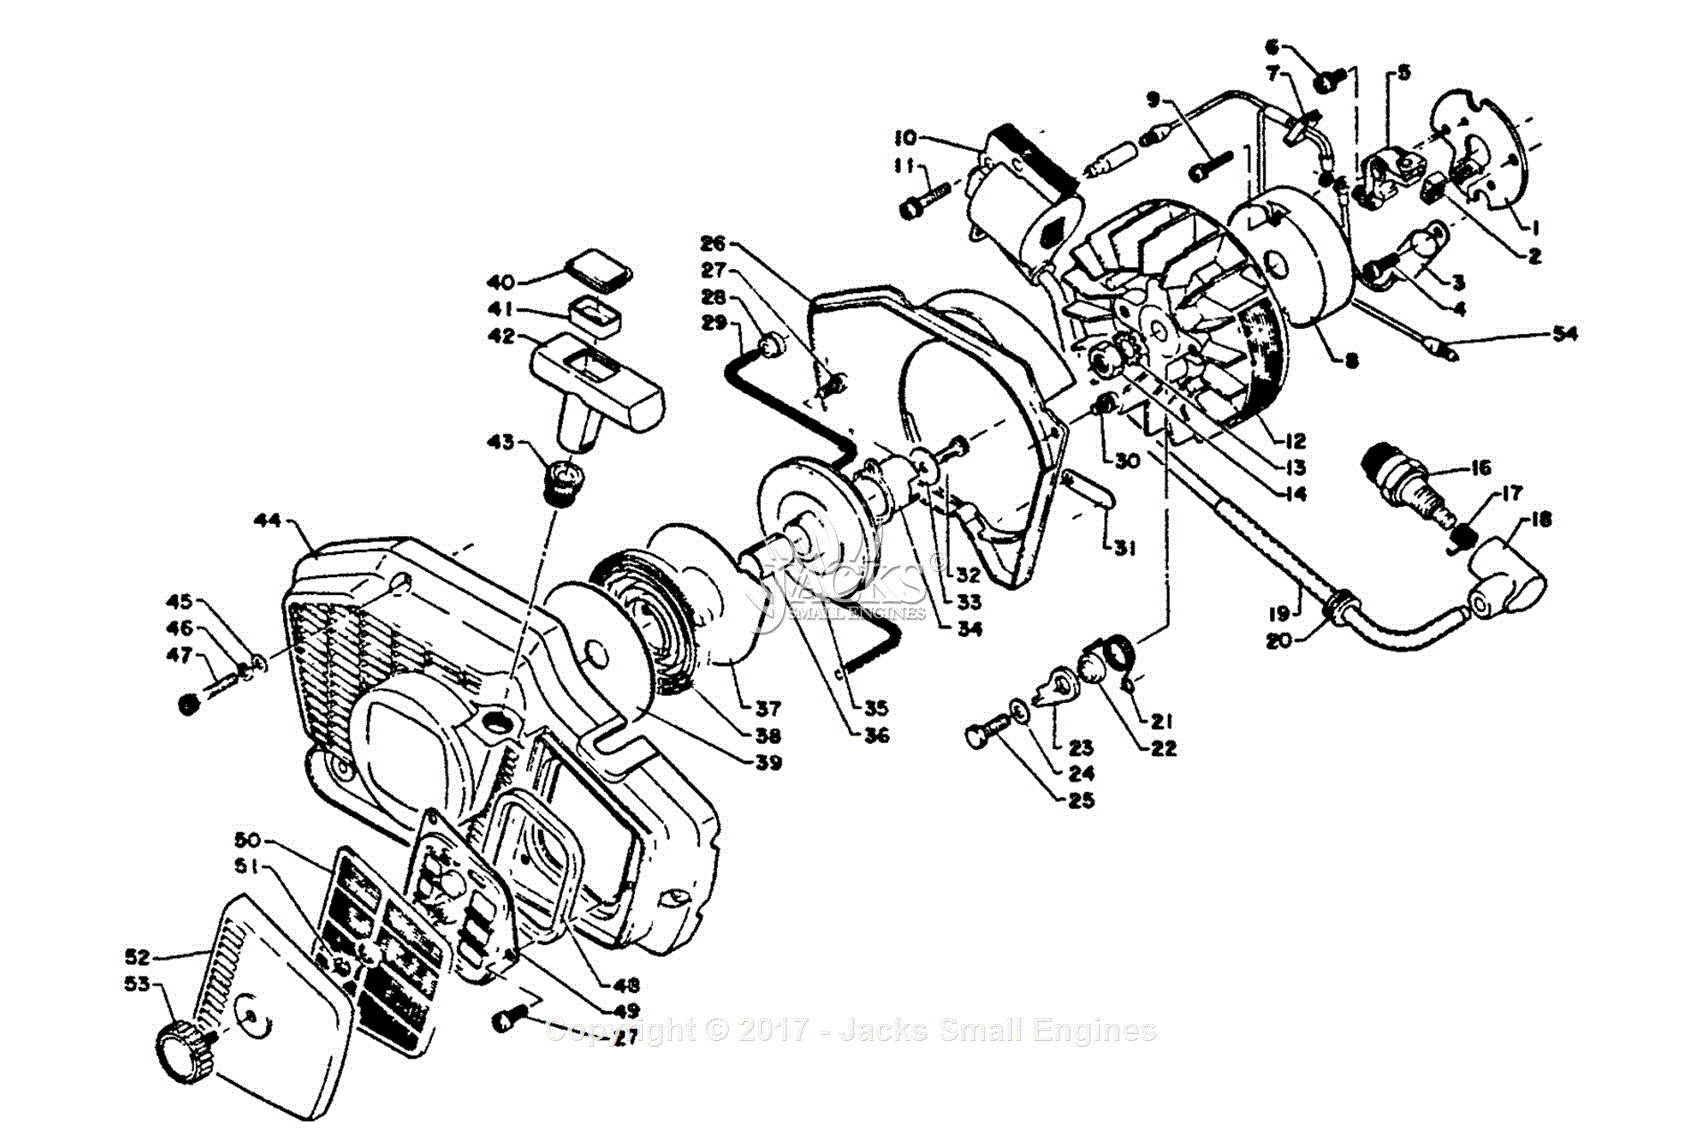 Echo CS-351VL Parts Diagram for Ignition, Starter, Air Cleaner